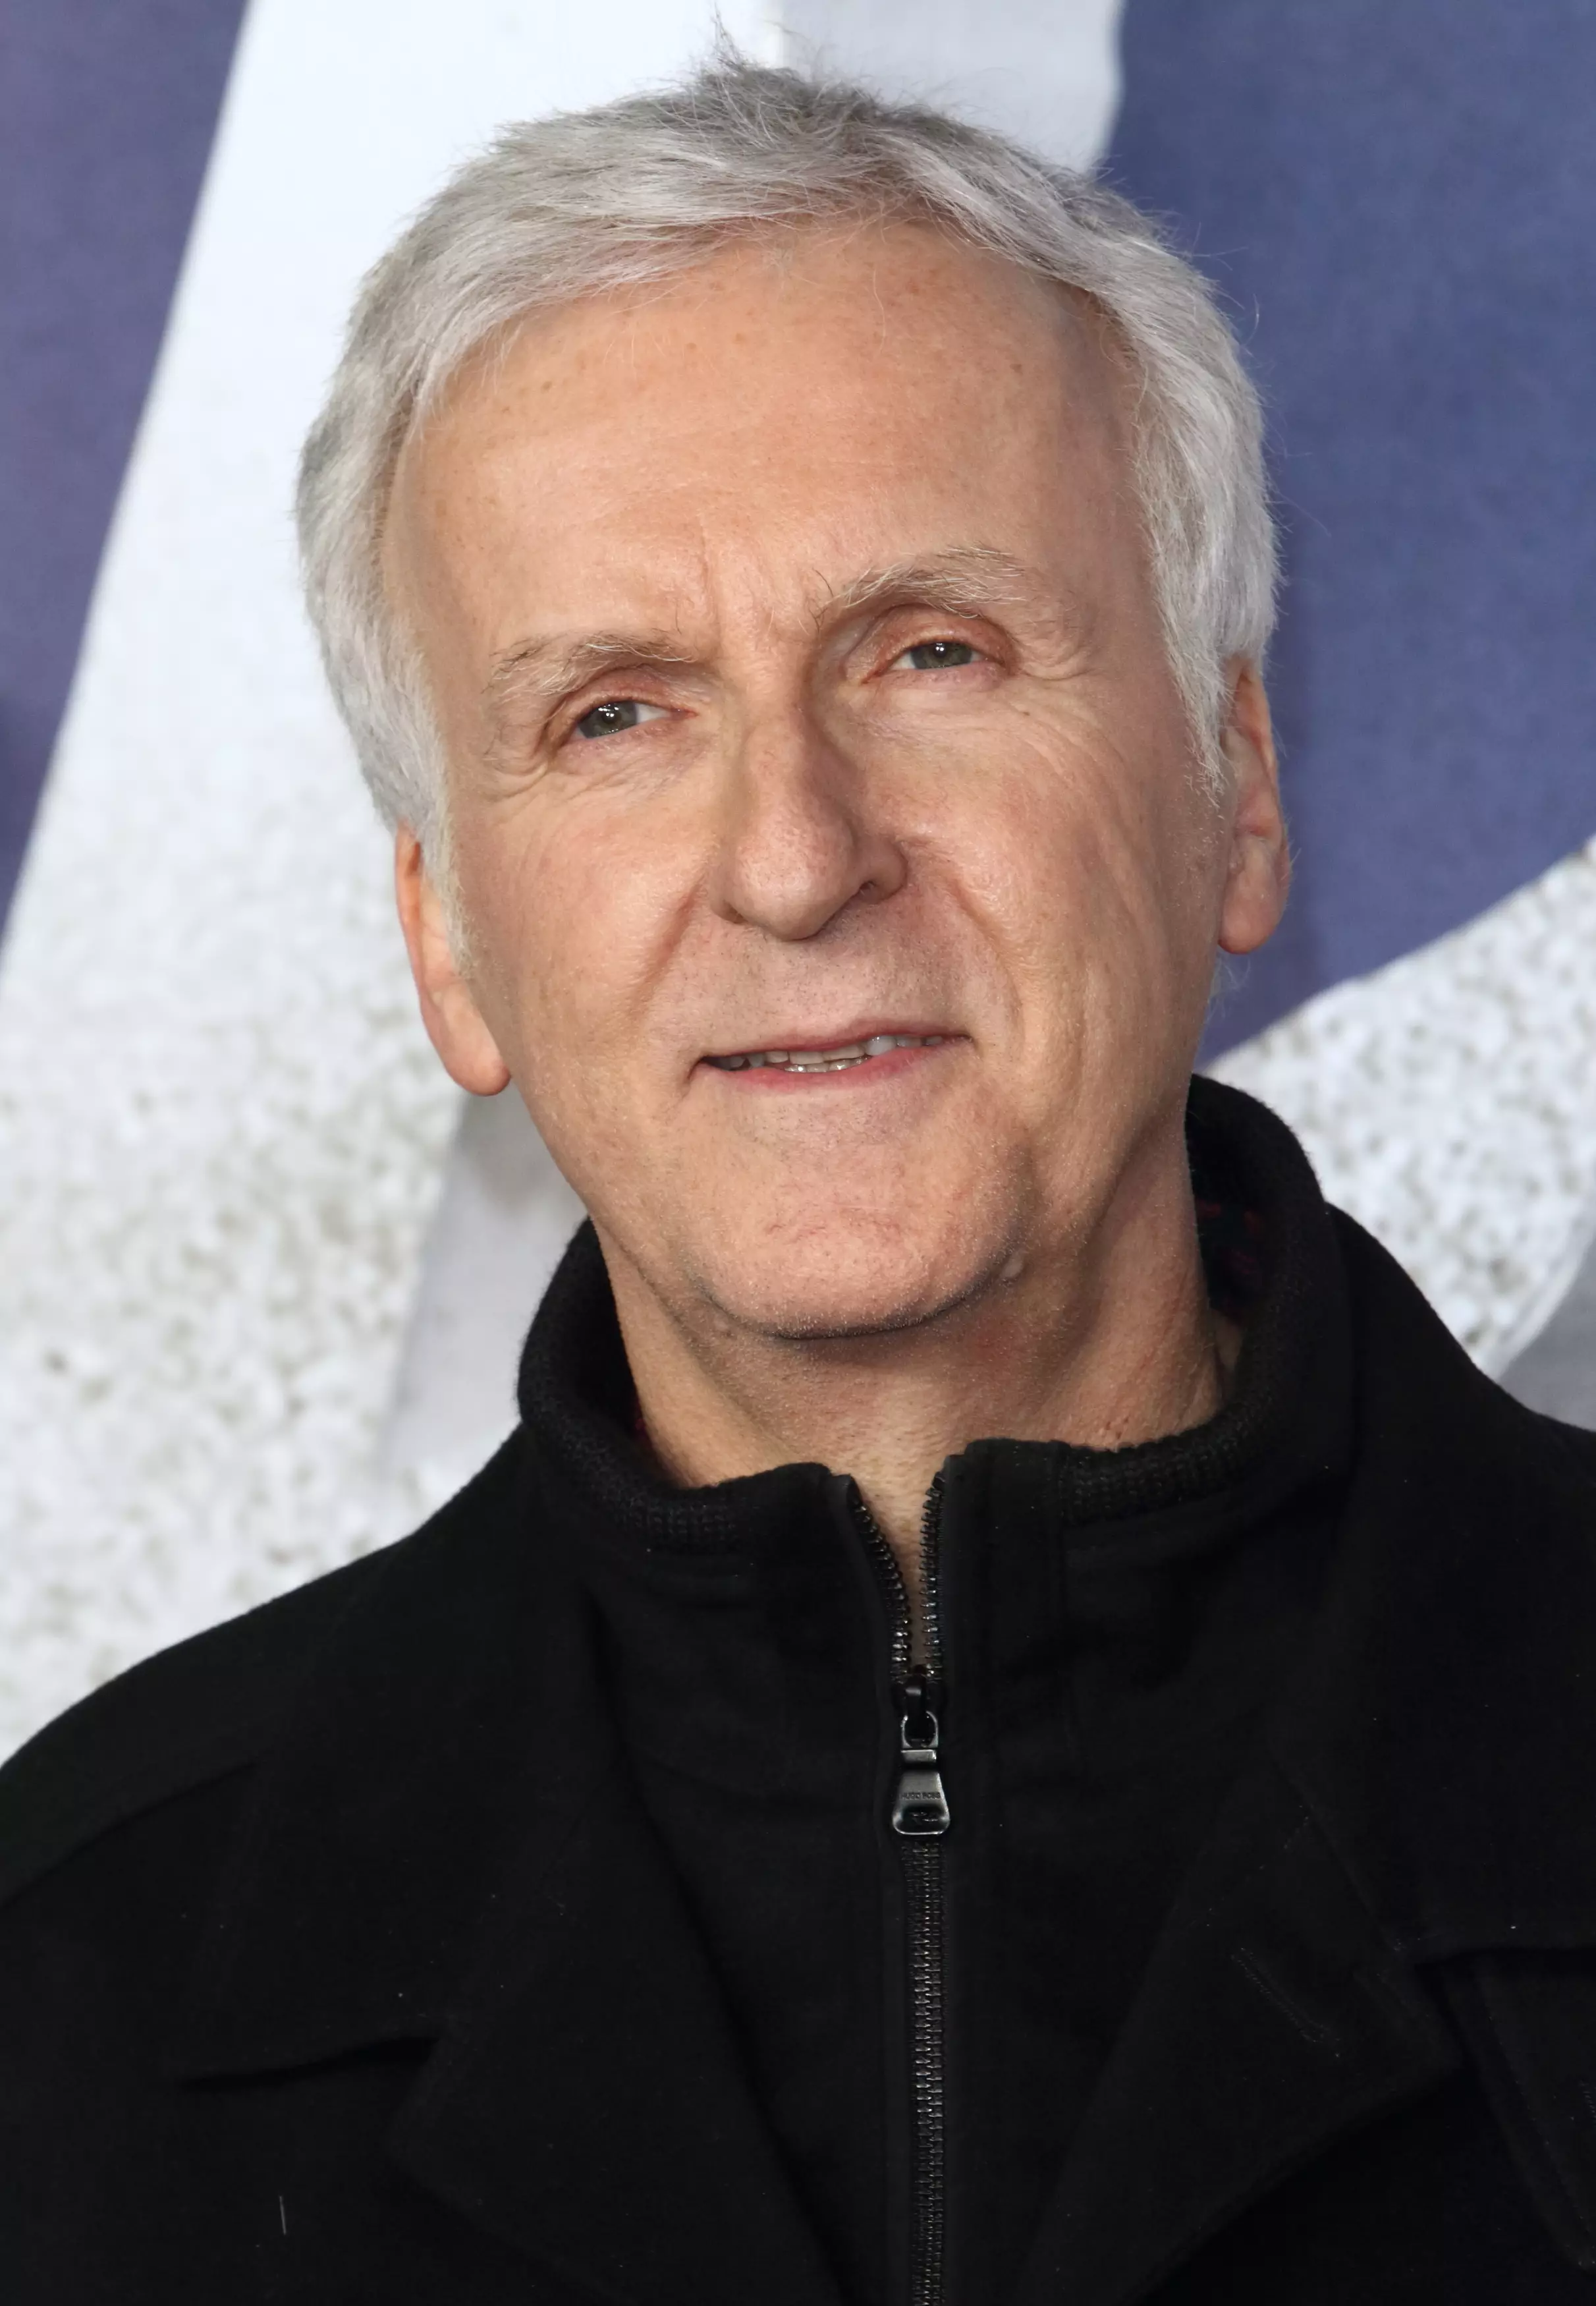 James Cameron has announced filming of 'Avatar 2' is 100 per cent complete (